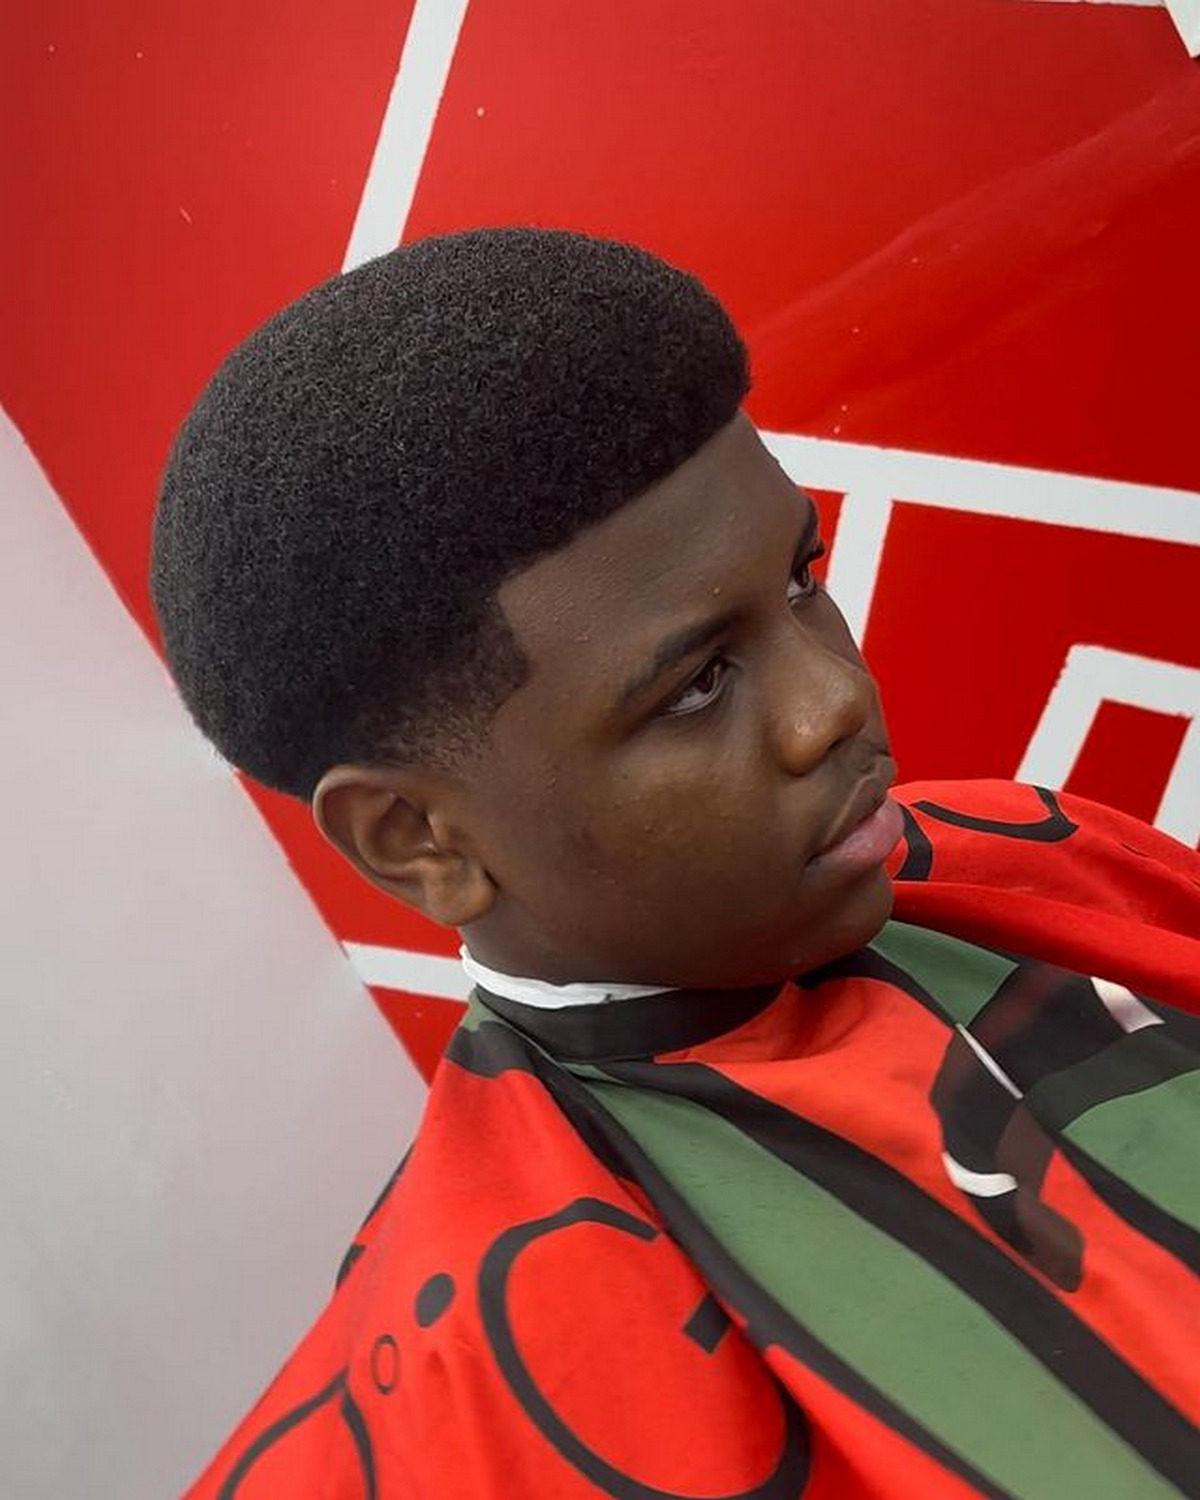 21 Comb Over Haircuts That Are Stylish For 2023